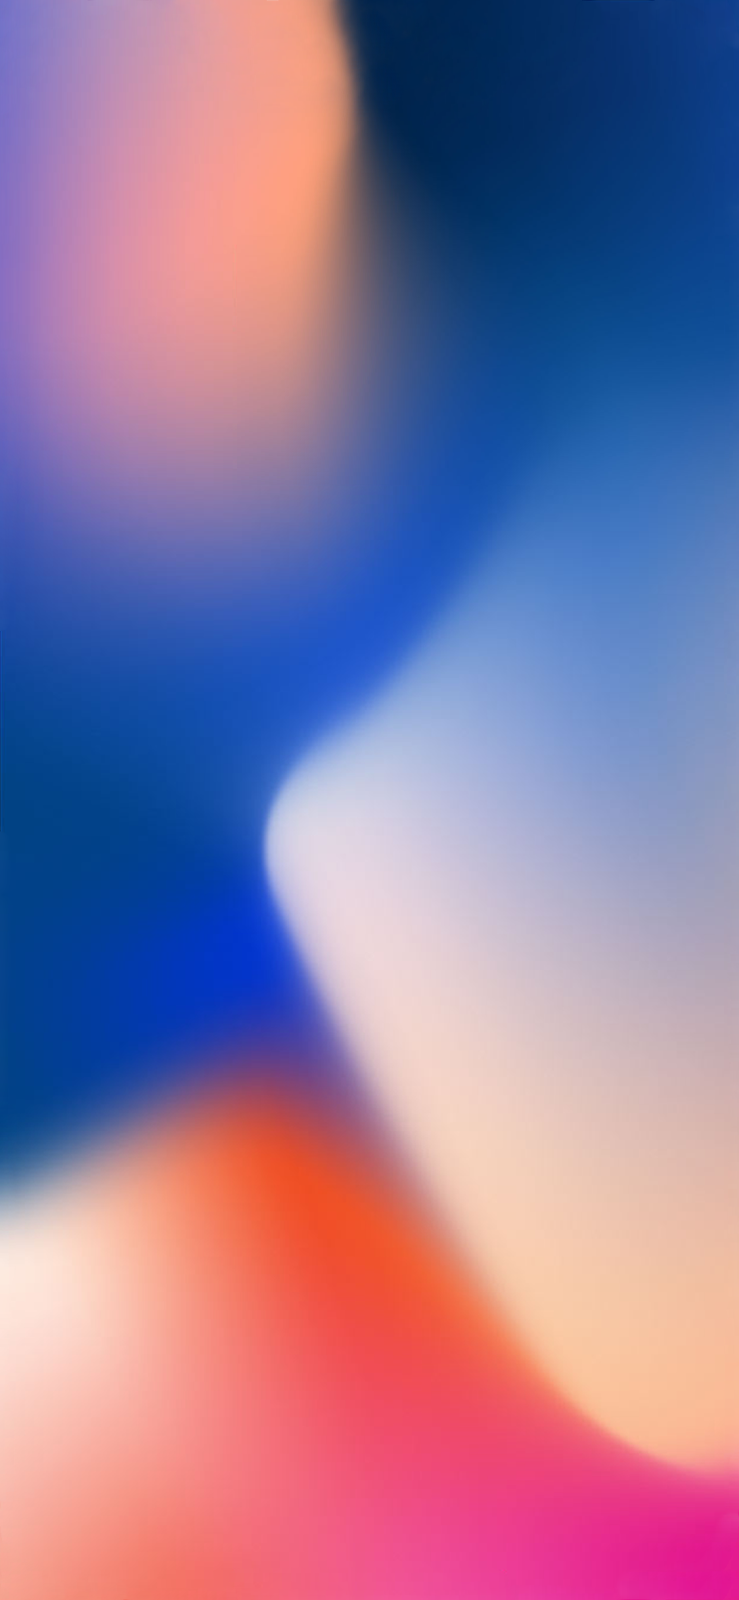 iOS 11 Wallpapers for iPhone X